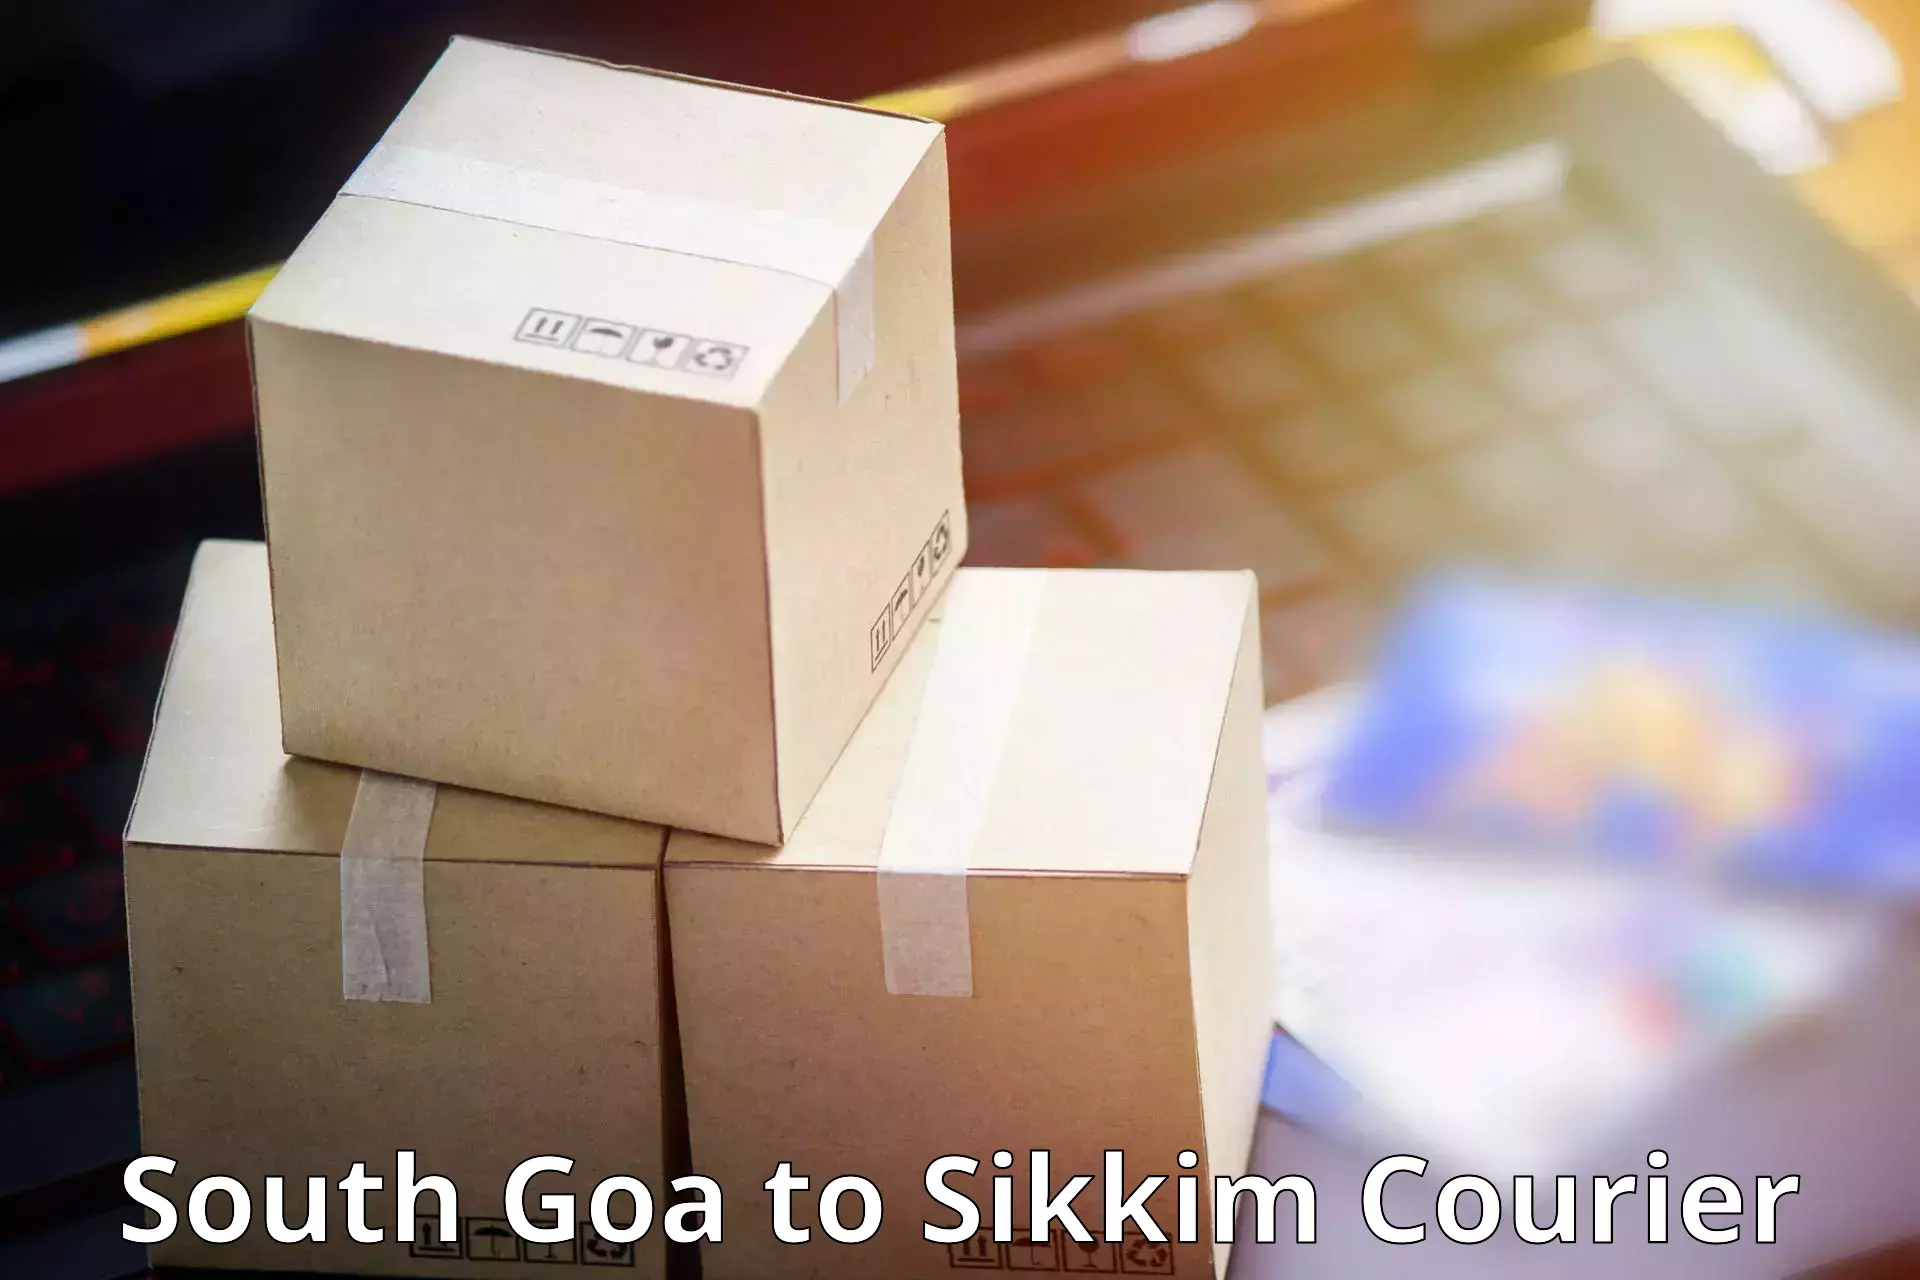 Doorstep delivery service South Goa to Sikkim